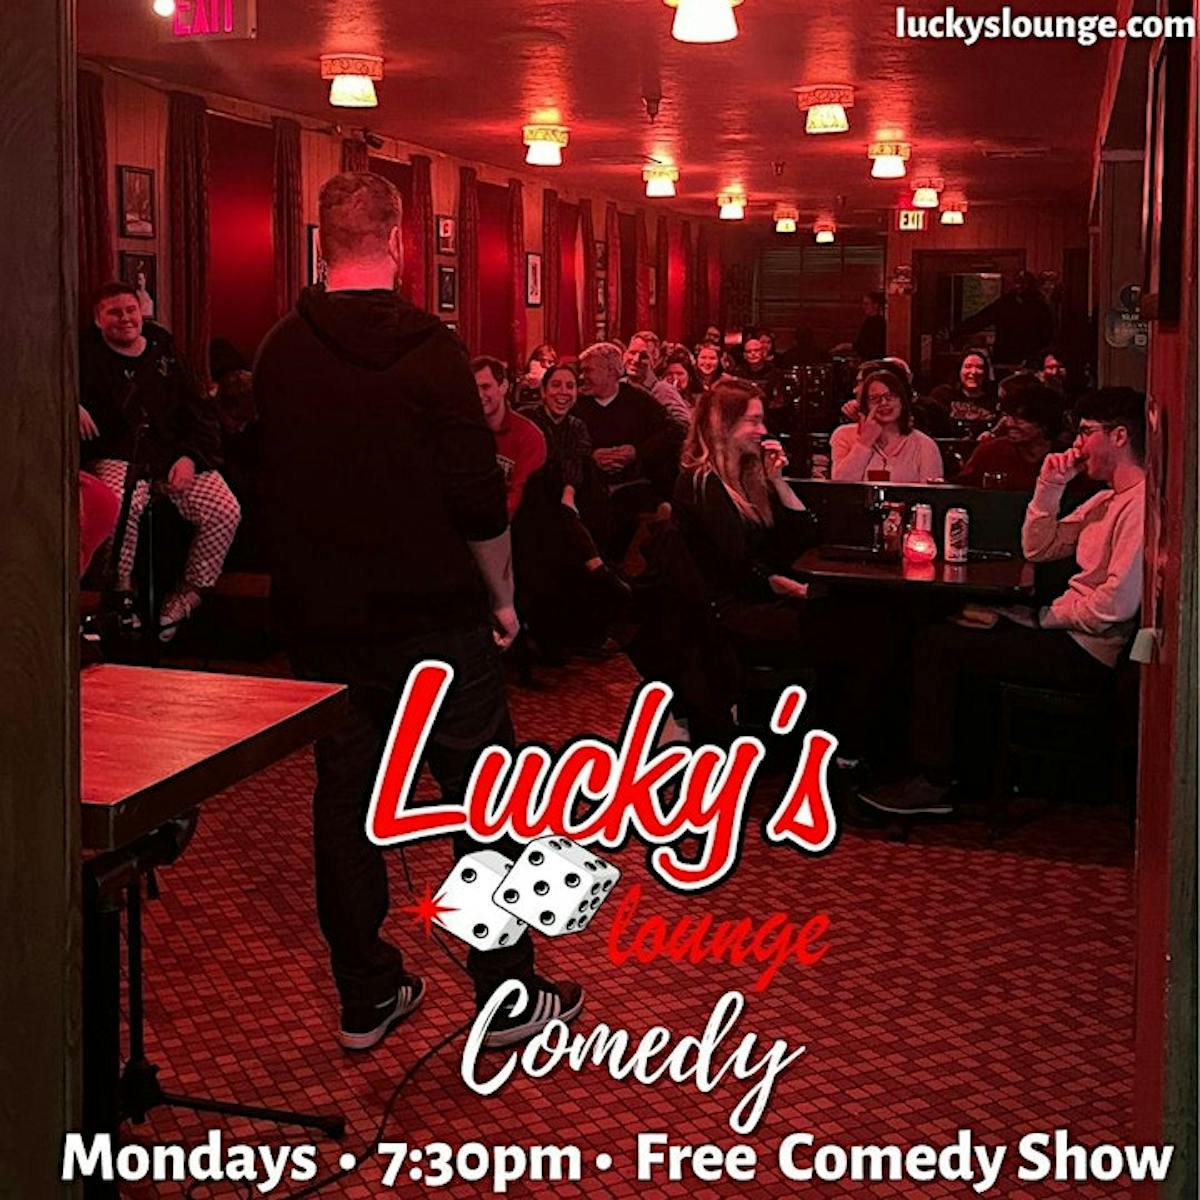 luckys lounge comedy nights mondays in boston